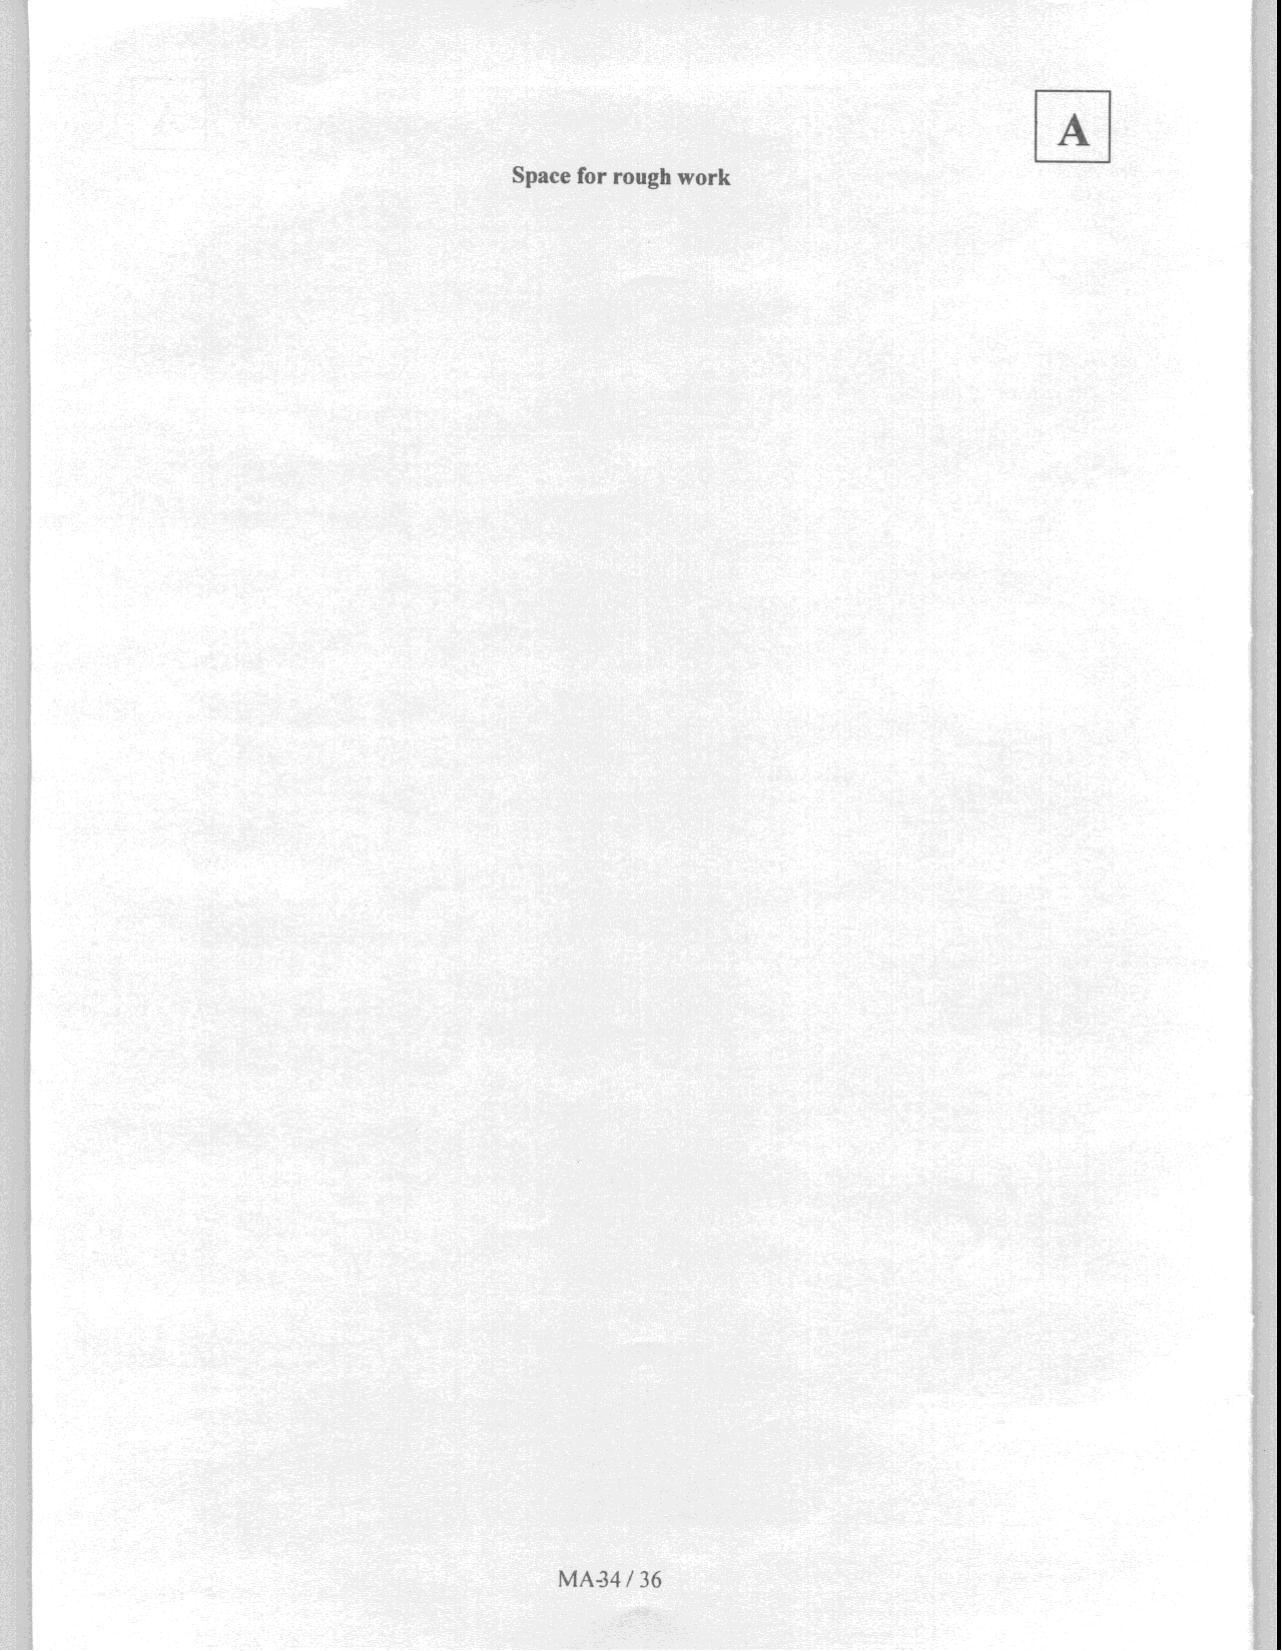 JAM 2008: MA Question Paper - Page 36